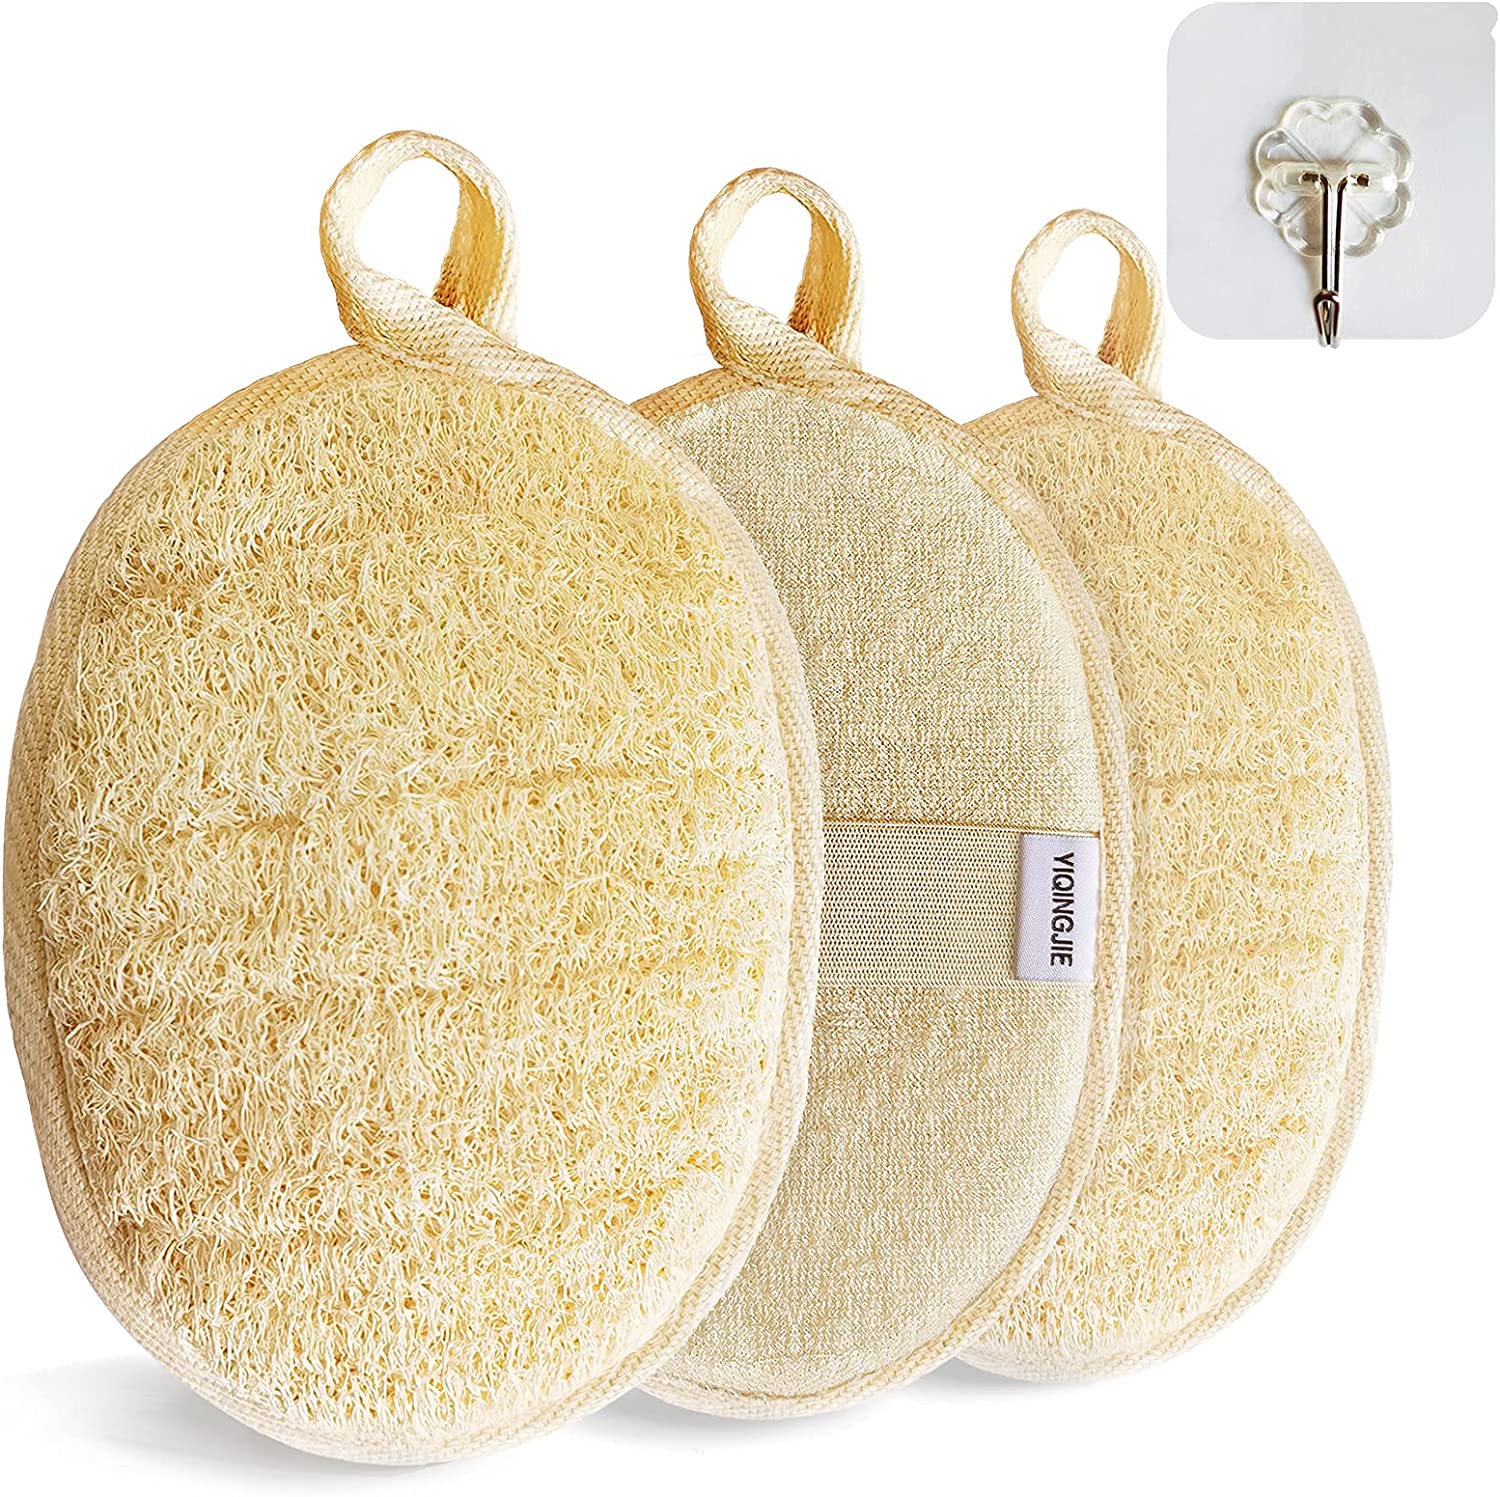 Natural Loofah Sponge Exfoliating Body Scrubber, Biodegradable Body Buffer for Women and Men, Beige